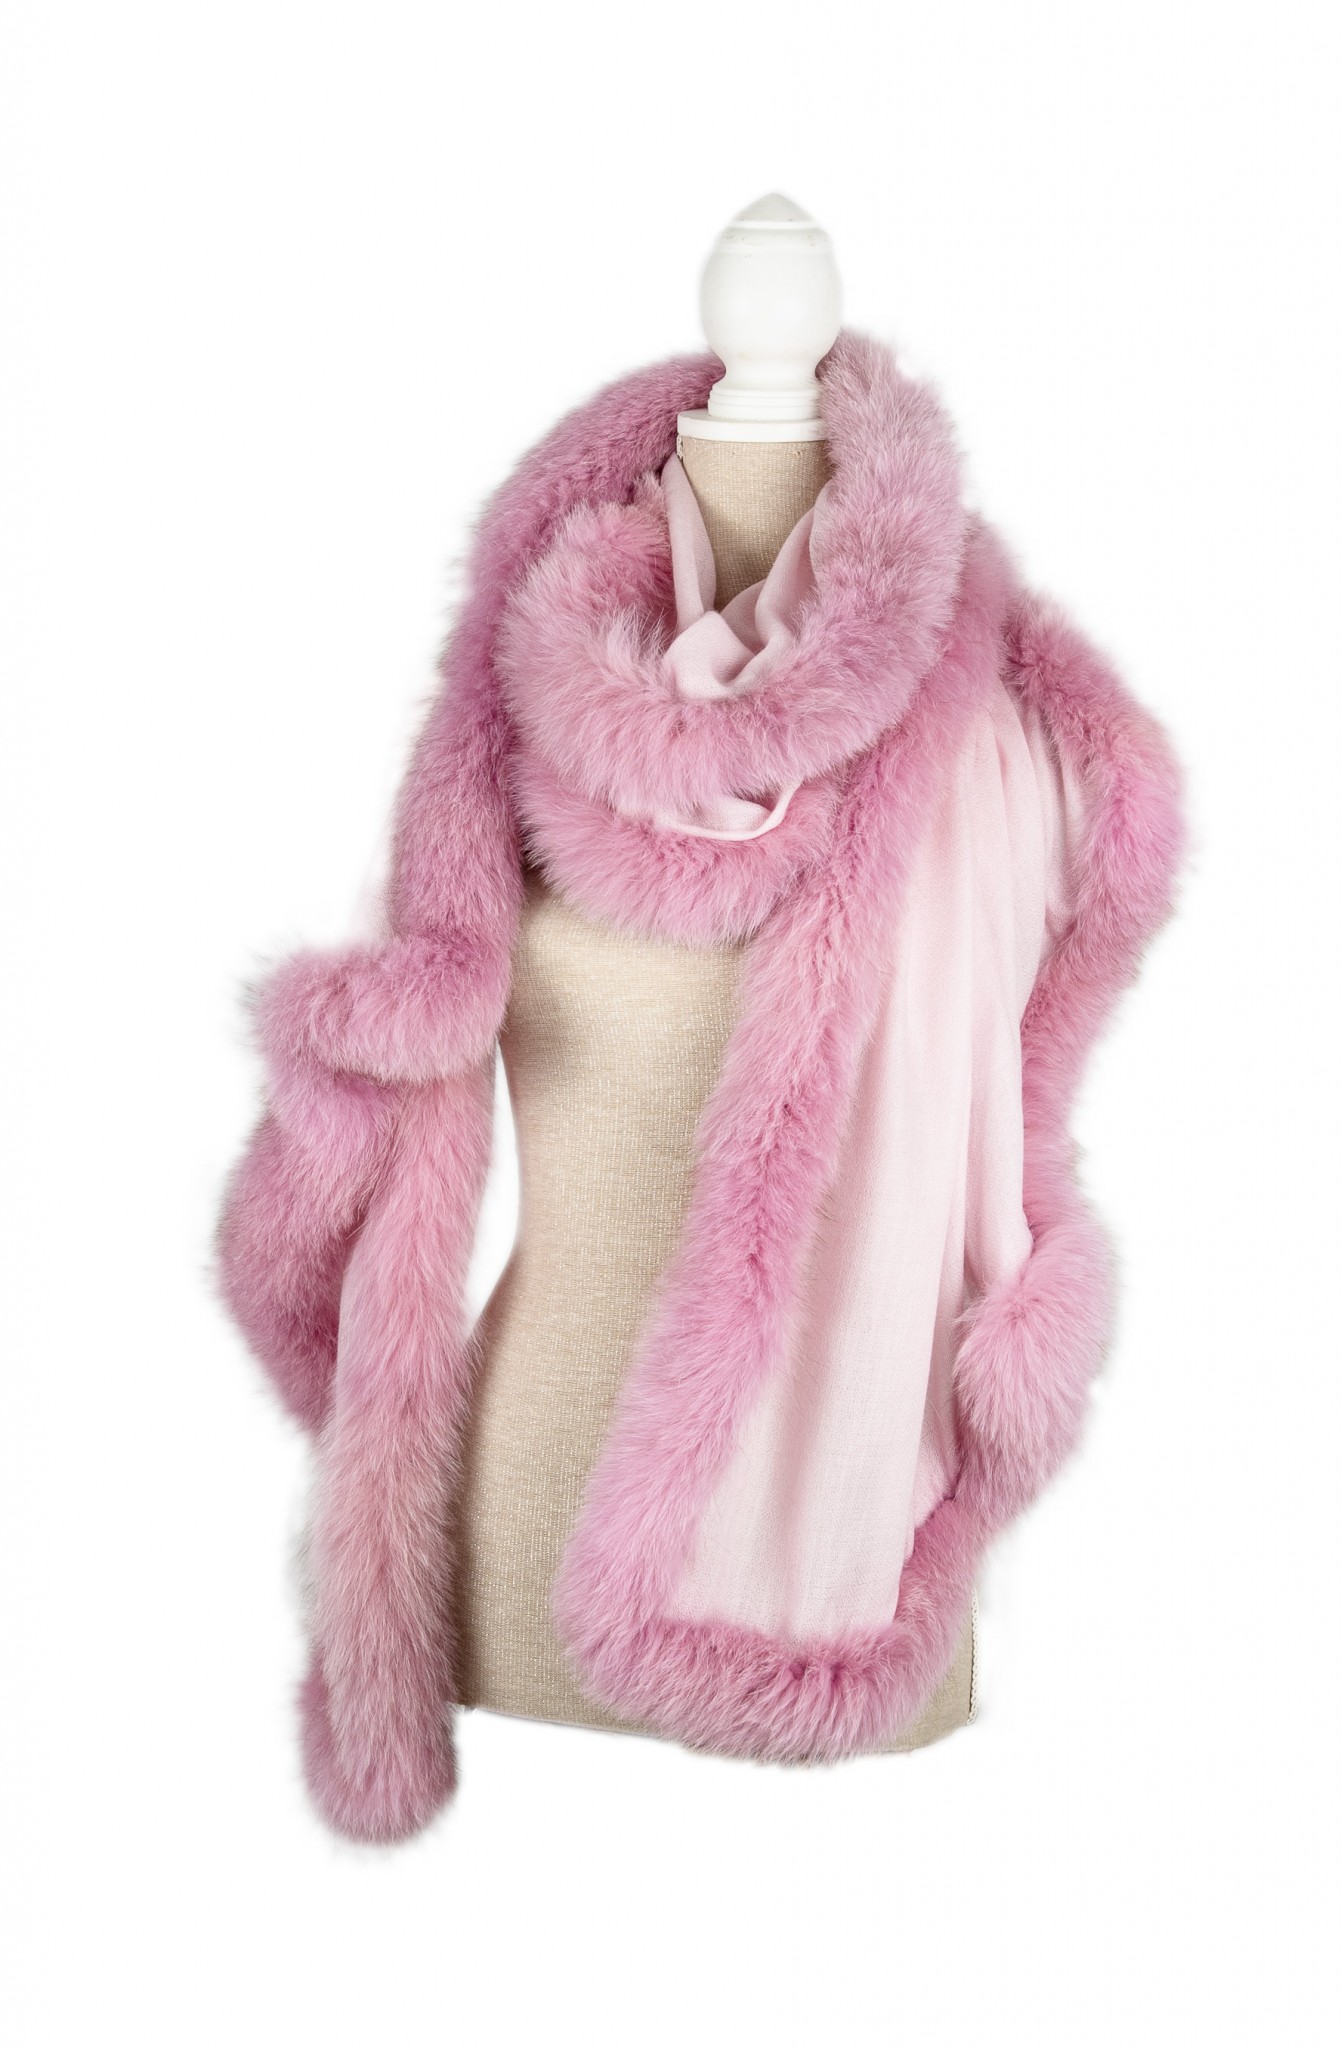 Our 'Sweetie' pink/fox cashmere wrap,, why not?!